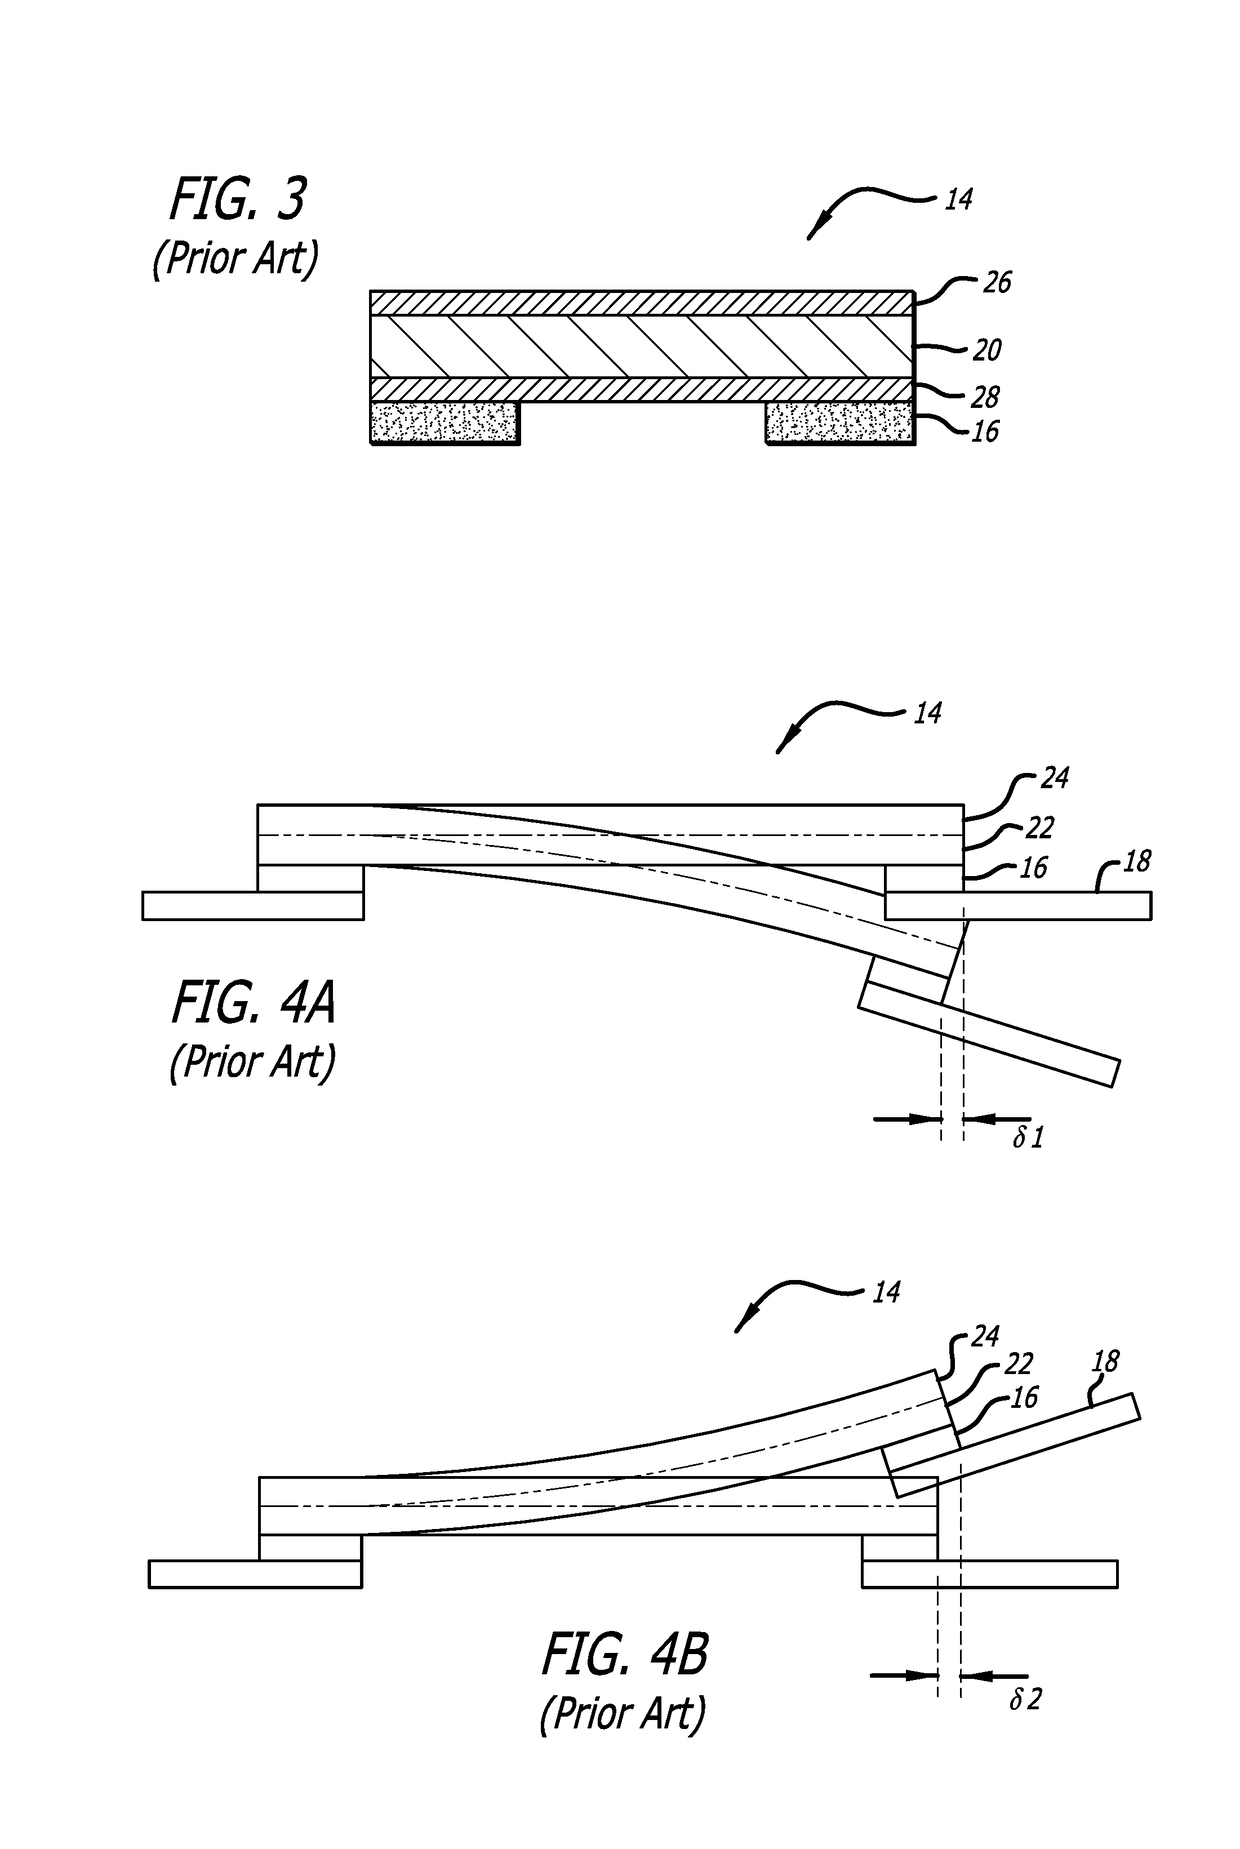 Multi-layer PZT microactuator with active PZT constraining layer for a DSA suspension